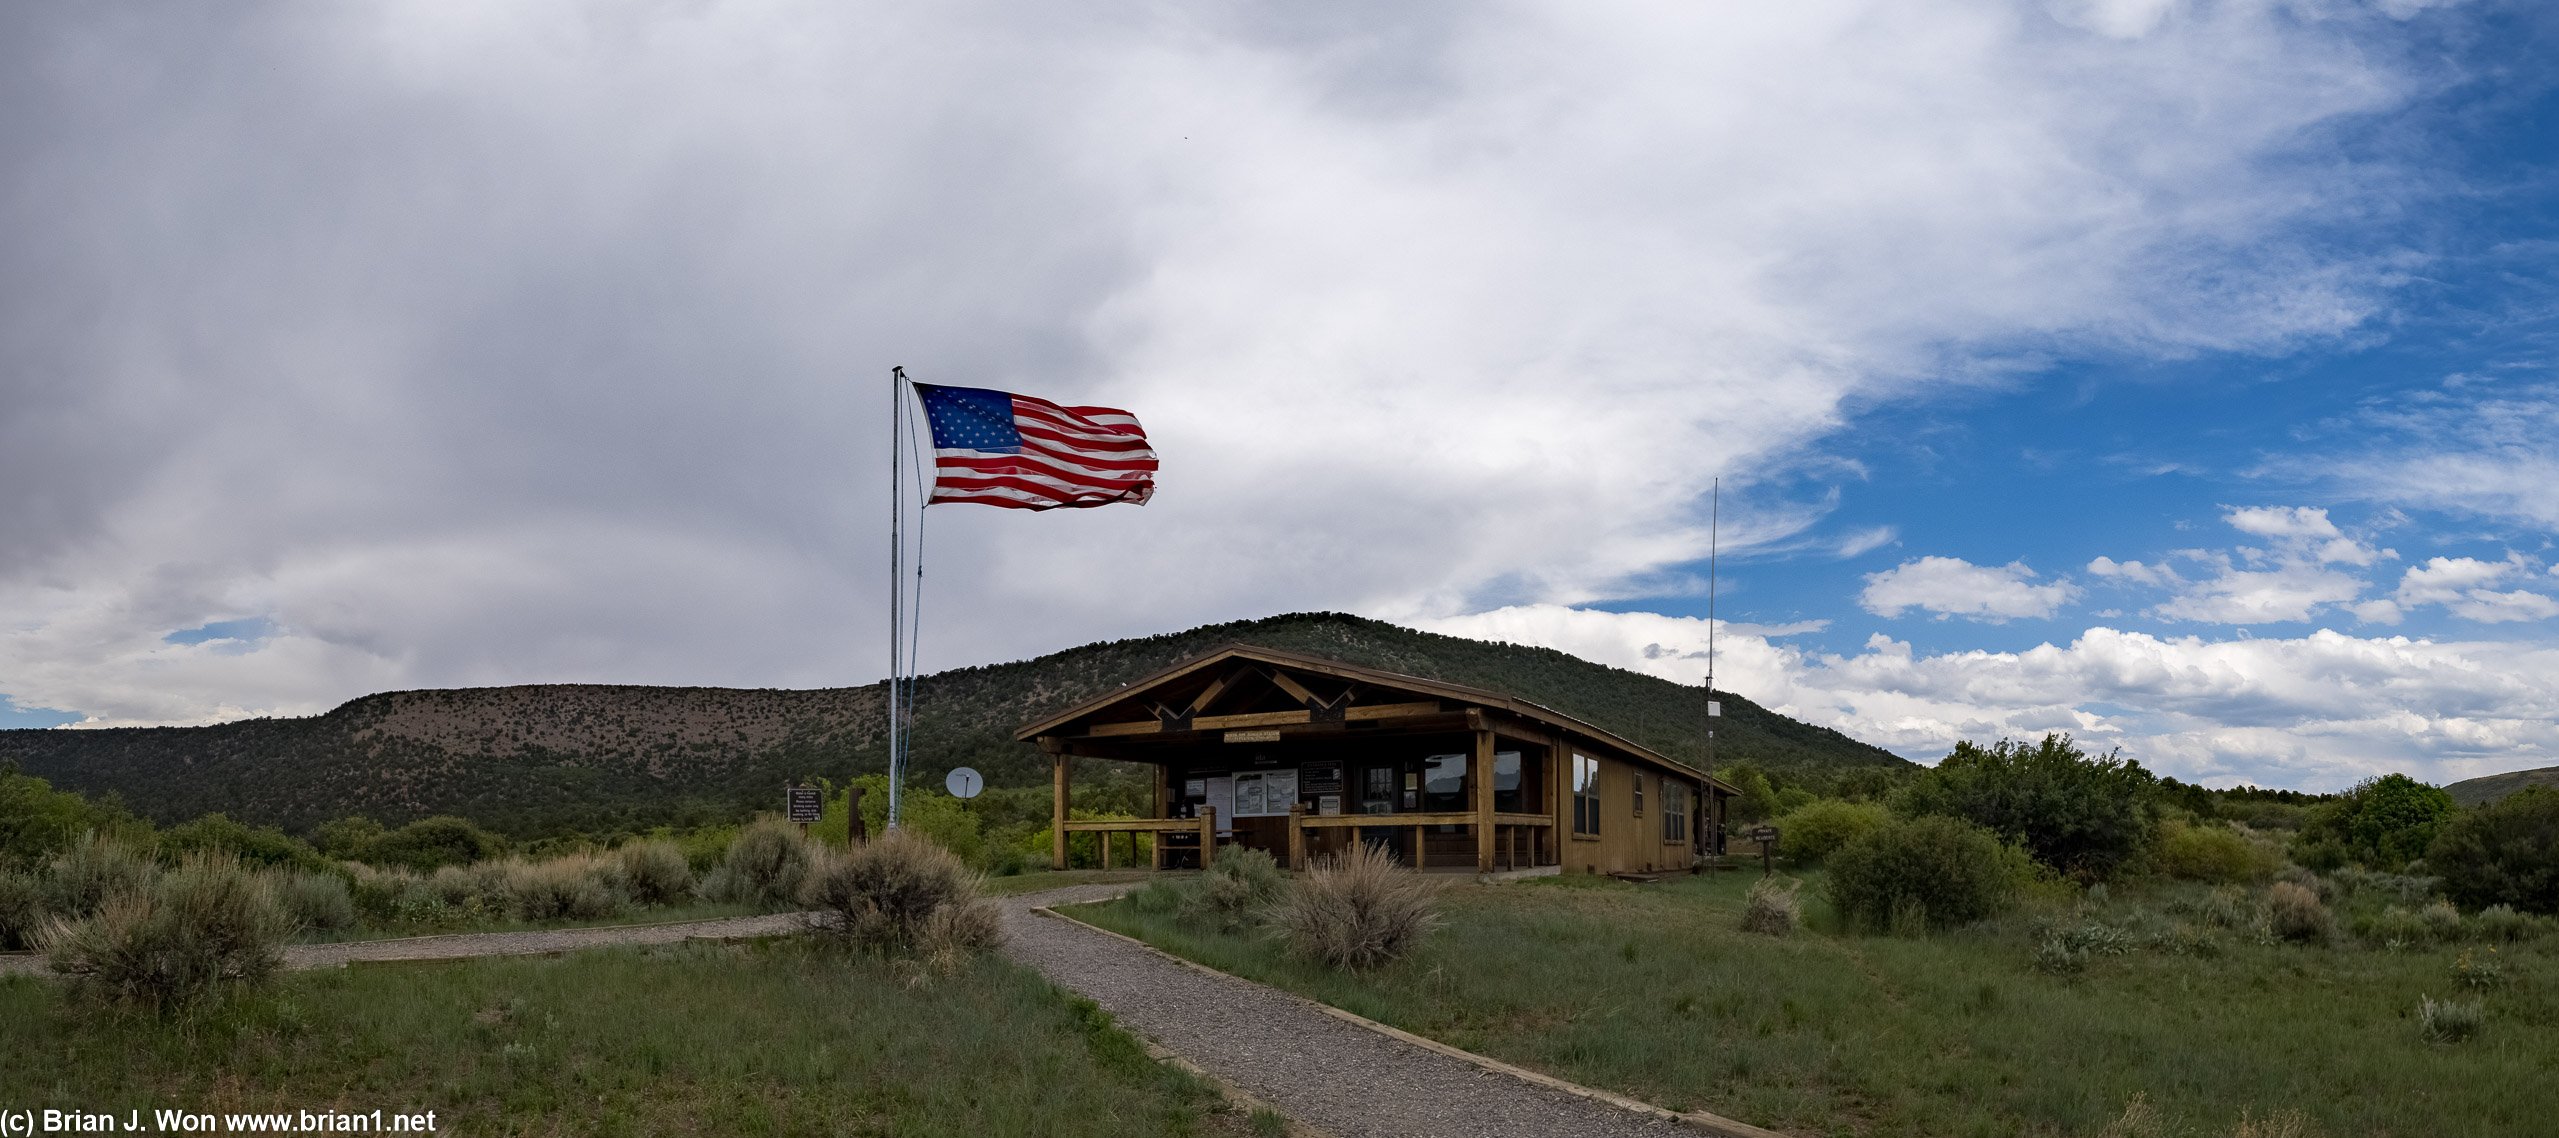 And the north rim's ranger station.